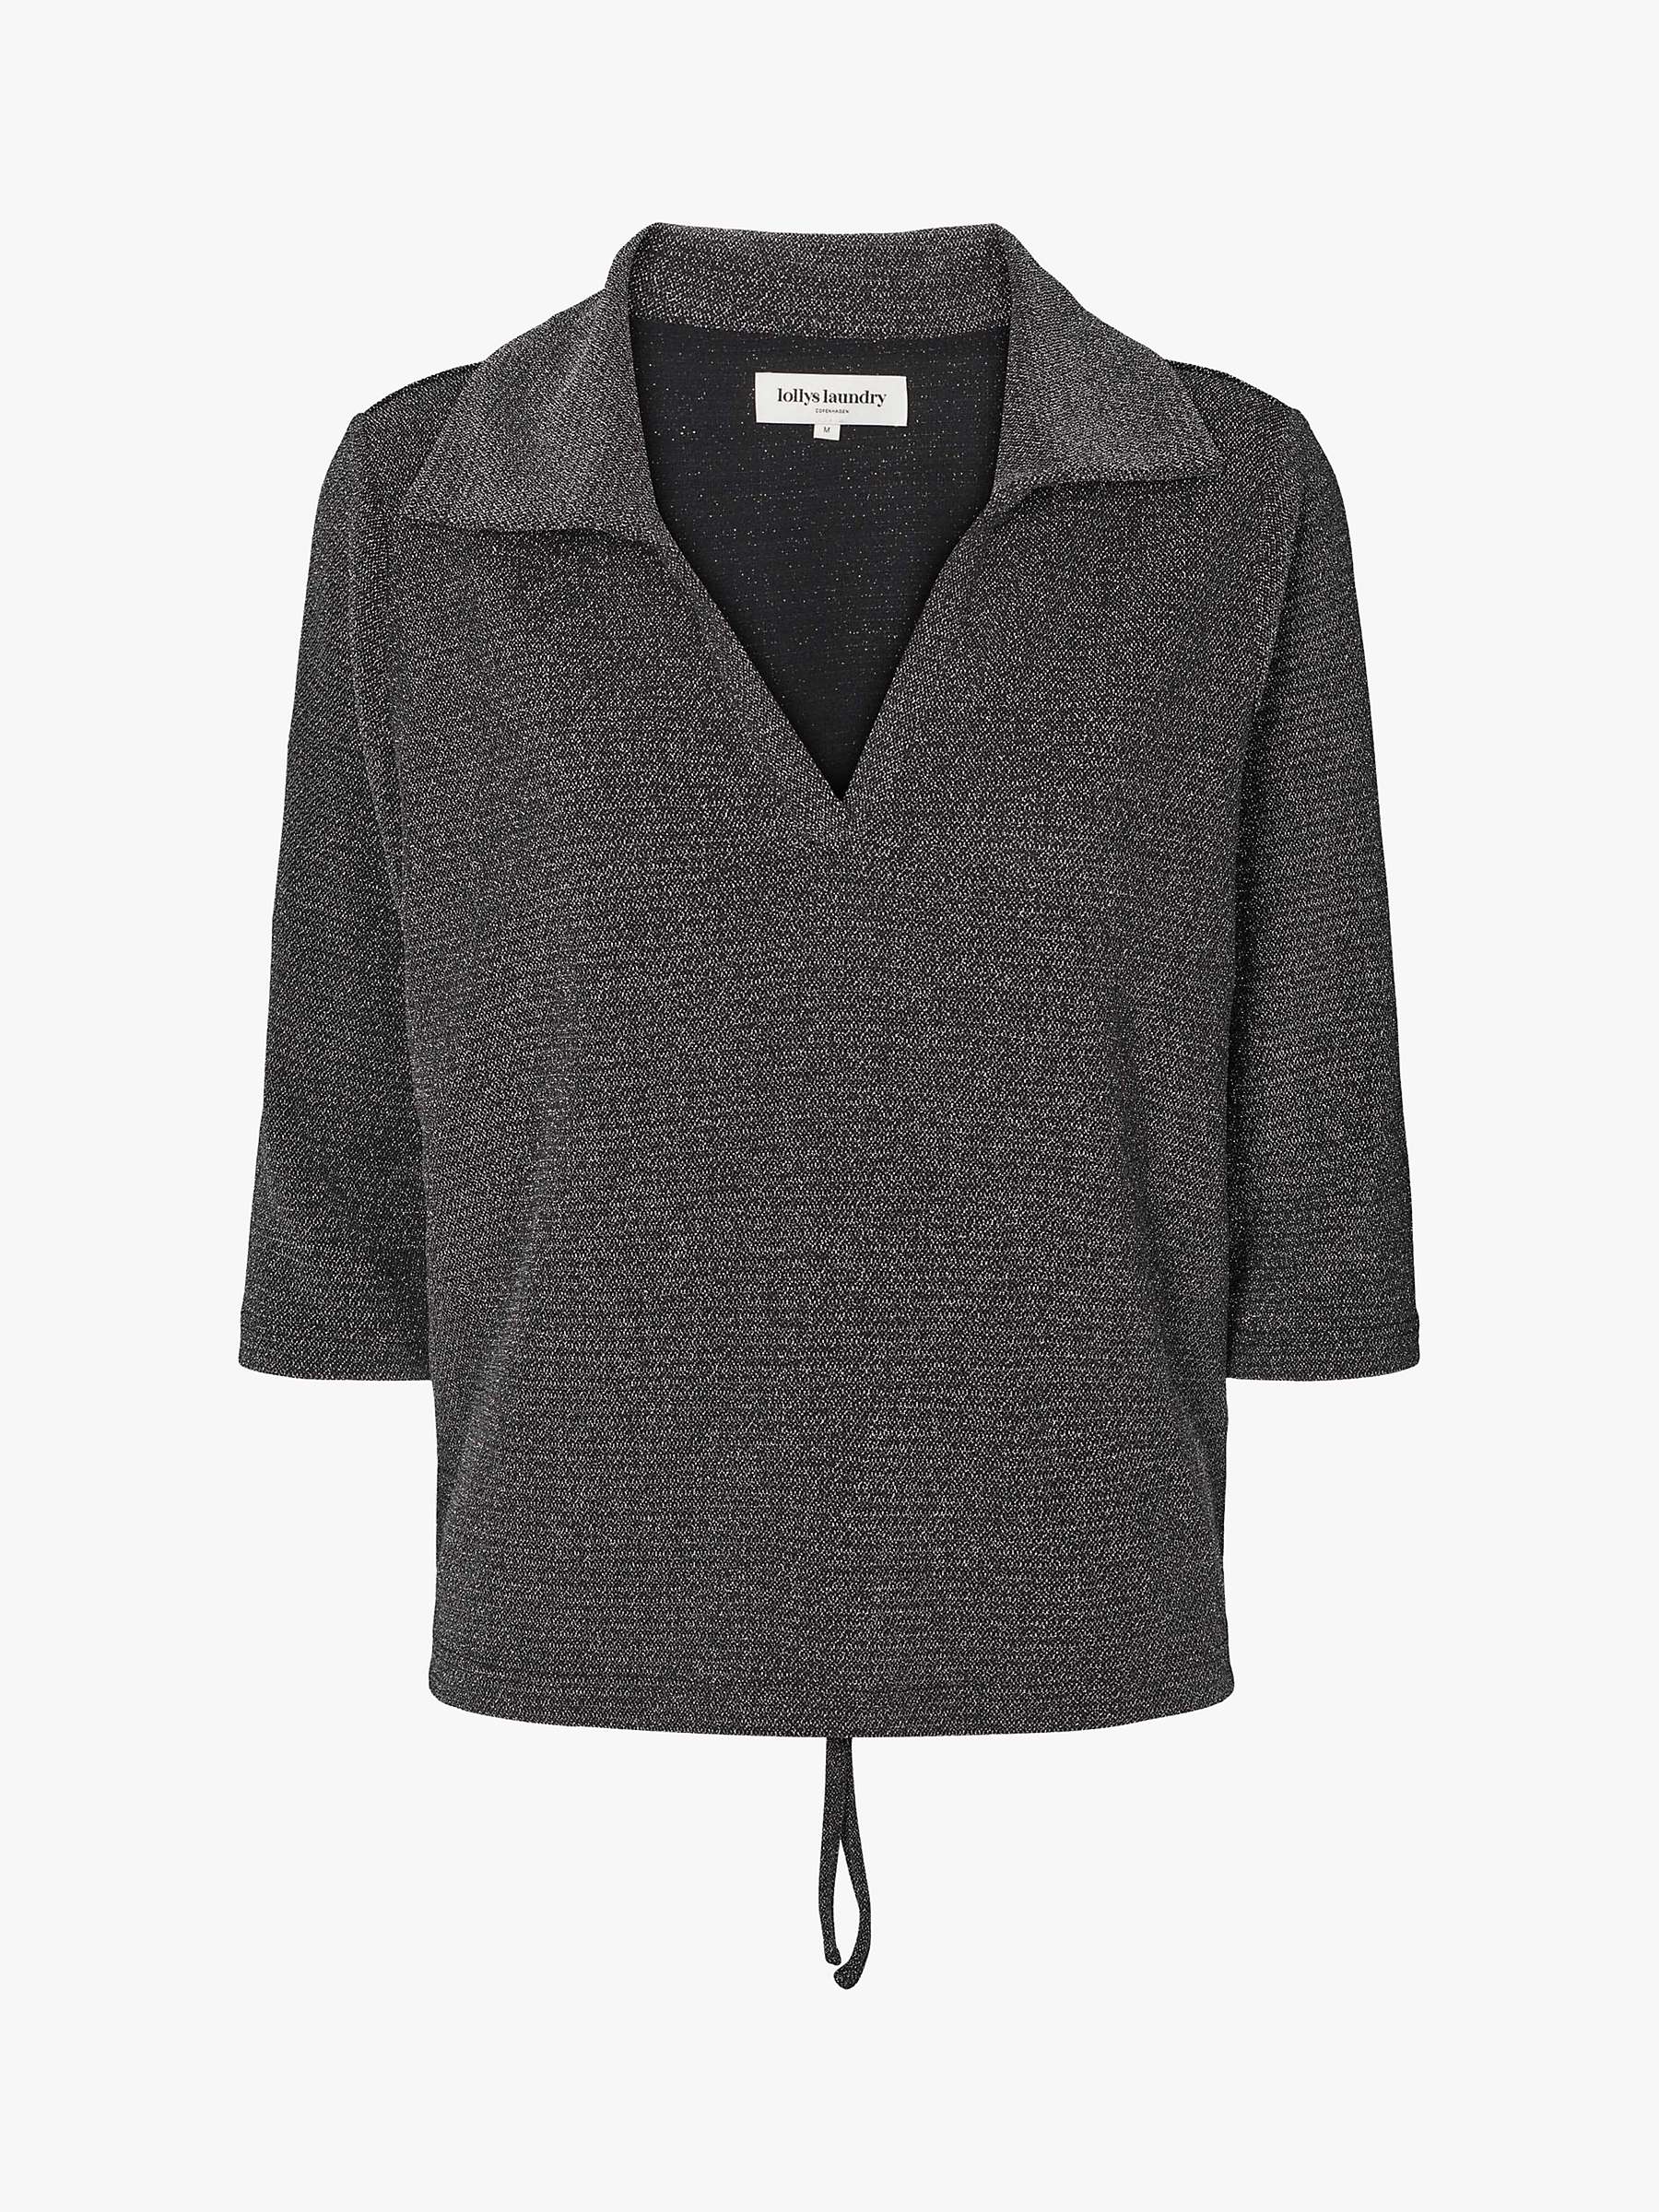 Buy Lollys Laundry Berlin Blouse Online at johnlewis.com